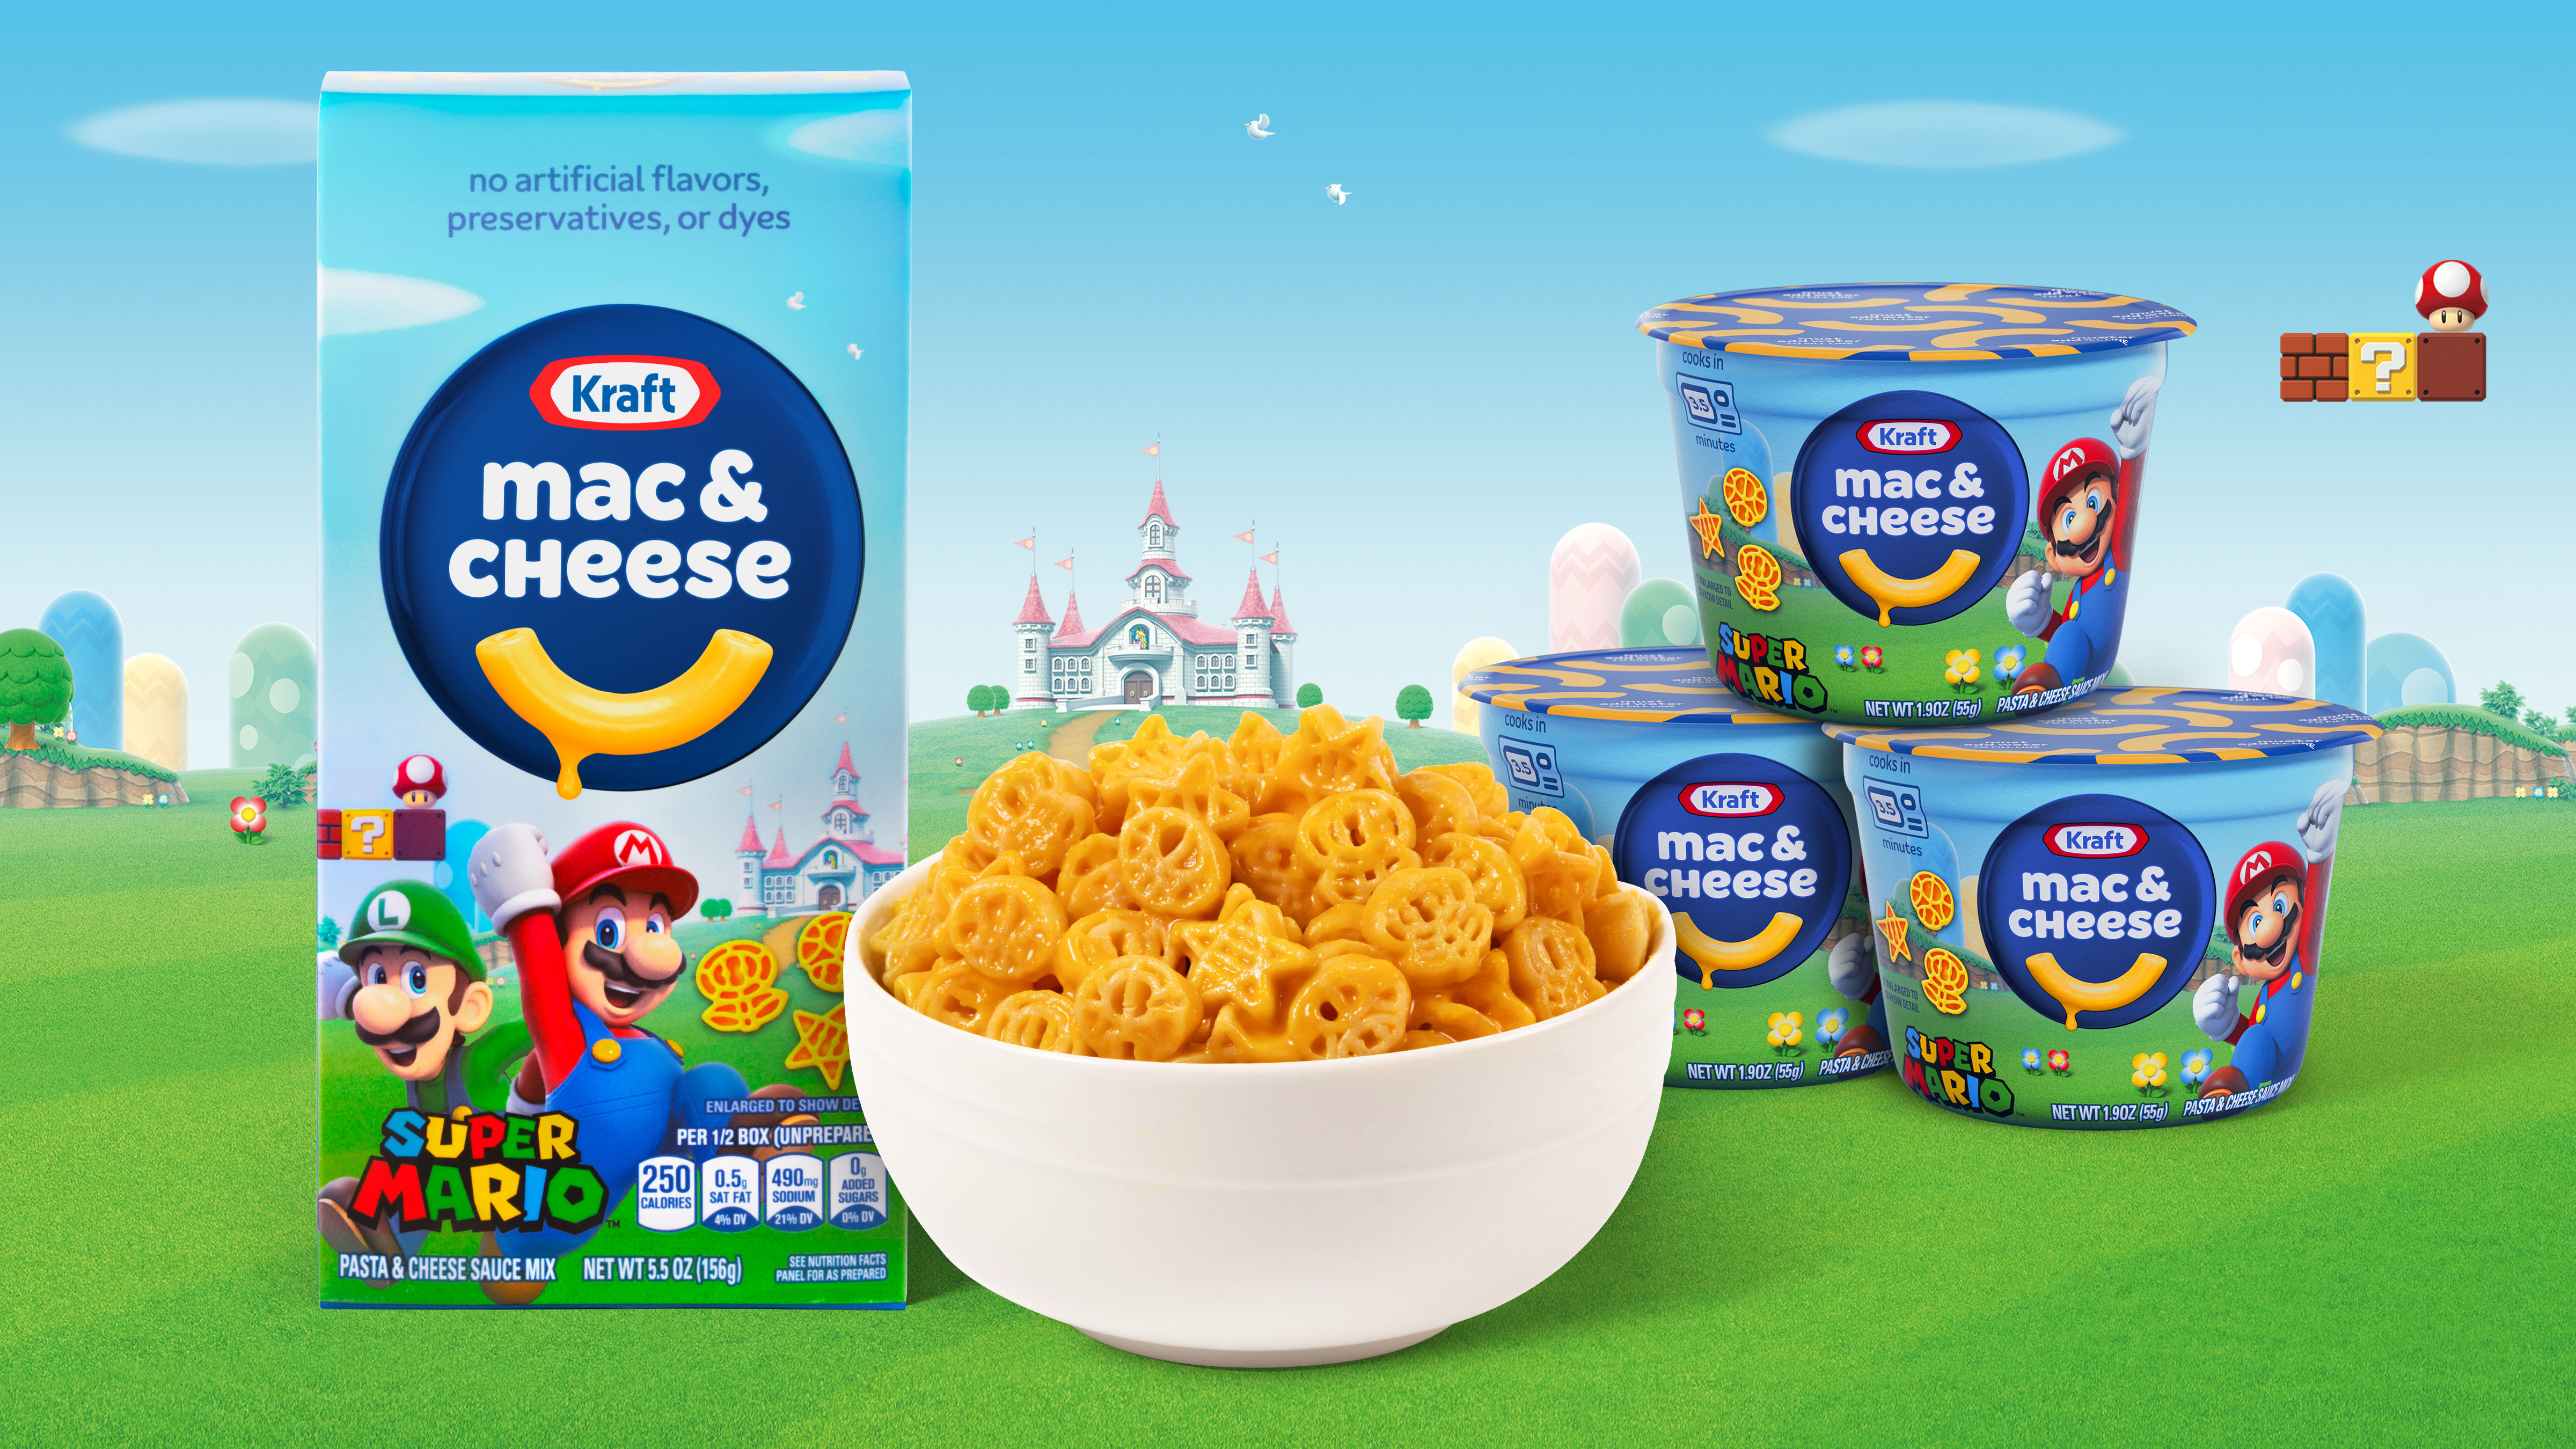 US: Kraft Mac & Cheese collabs with Nintendo and Super Mario